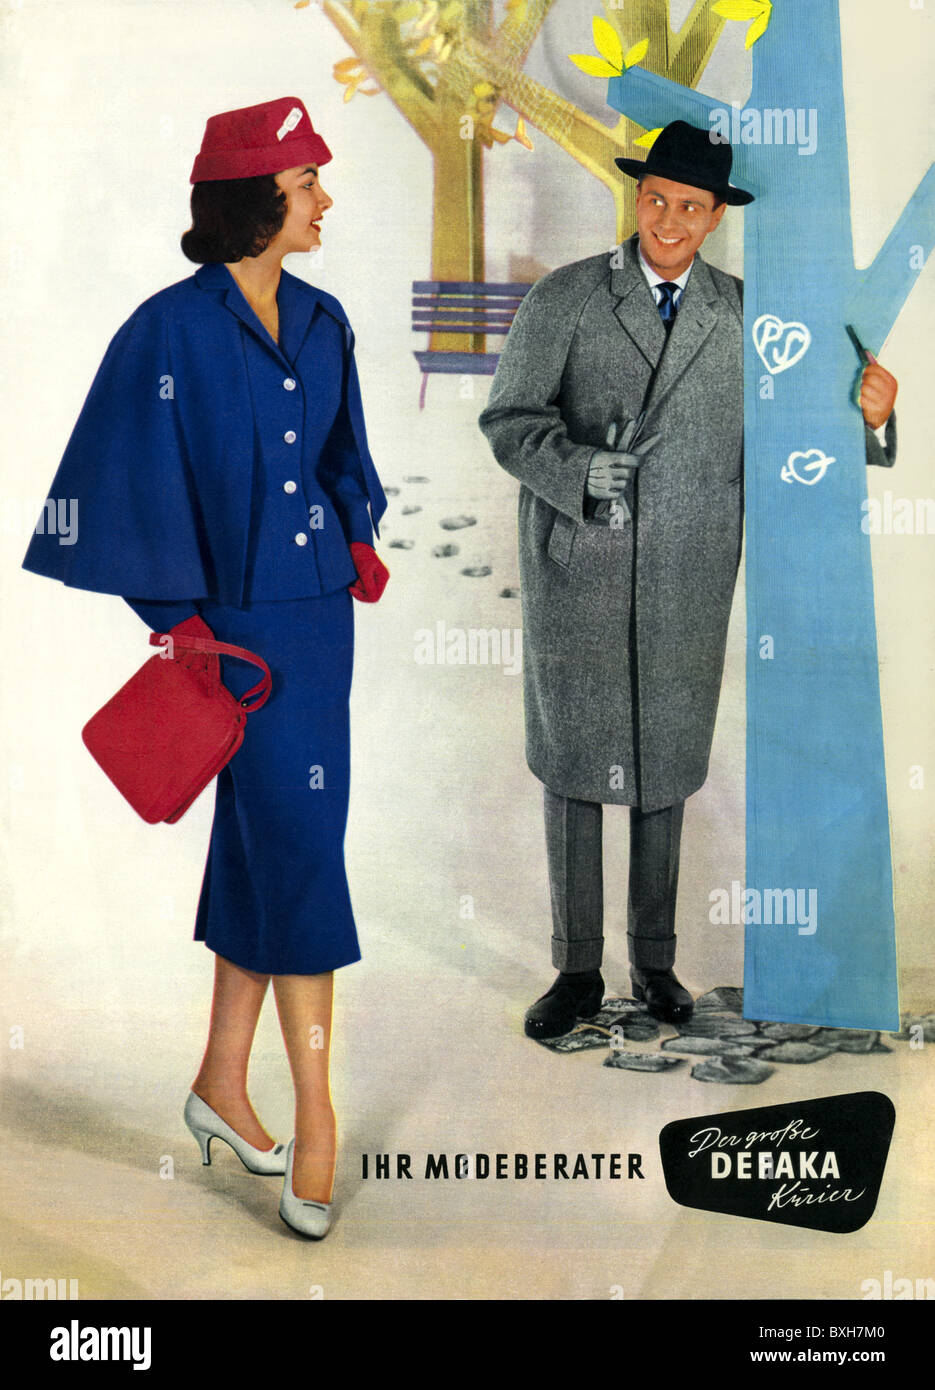 fashion, Defaka (department store) fashion catalogue, Germany, 1957, title page, illustration showing Petra Schuermann, Miss World of 1956, advertising, men's fashion, ladies' fashion, tippet, tippets, wool, jacket, coat, hat, handbag, purse, 1950s, 50s, historic, historical, skirt, elegant, elegance, Schurmann, Schürmann, people, 20th century, woman, women, female, man, men, male, Additional-Rights-Clearences-Not Available Stock Photo